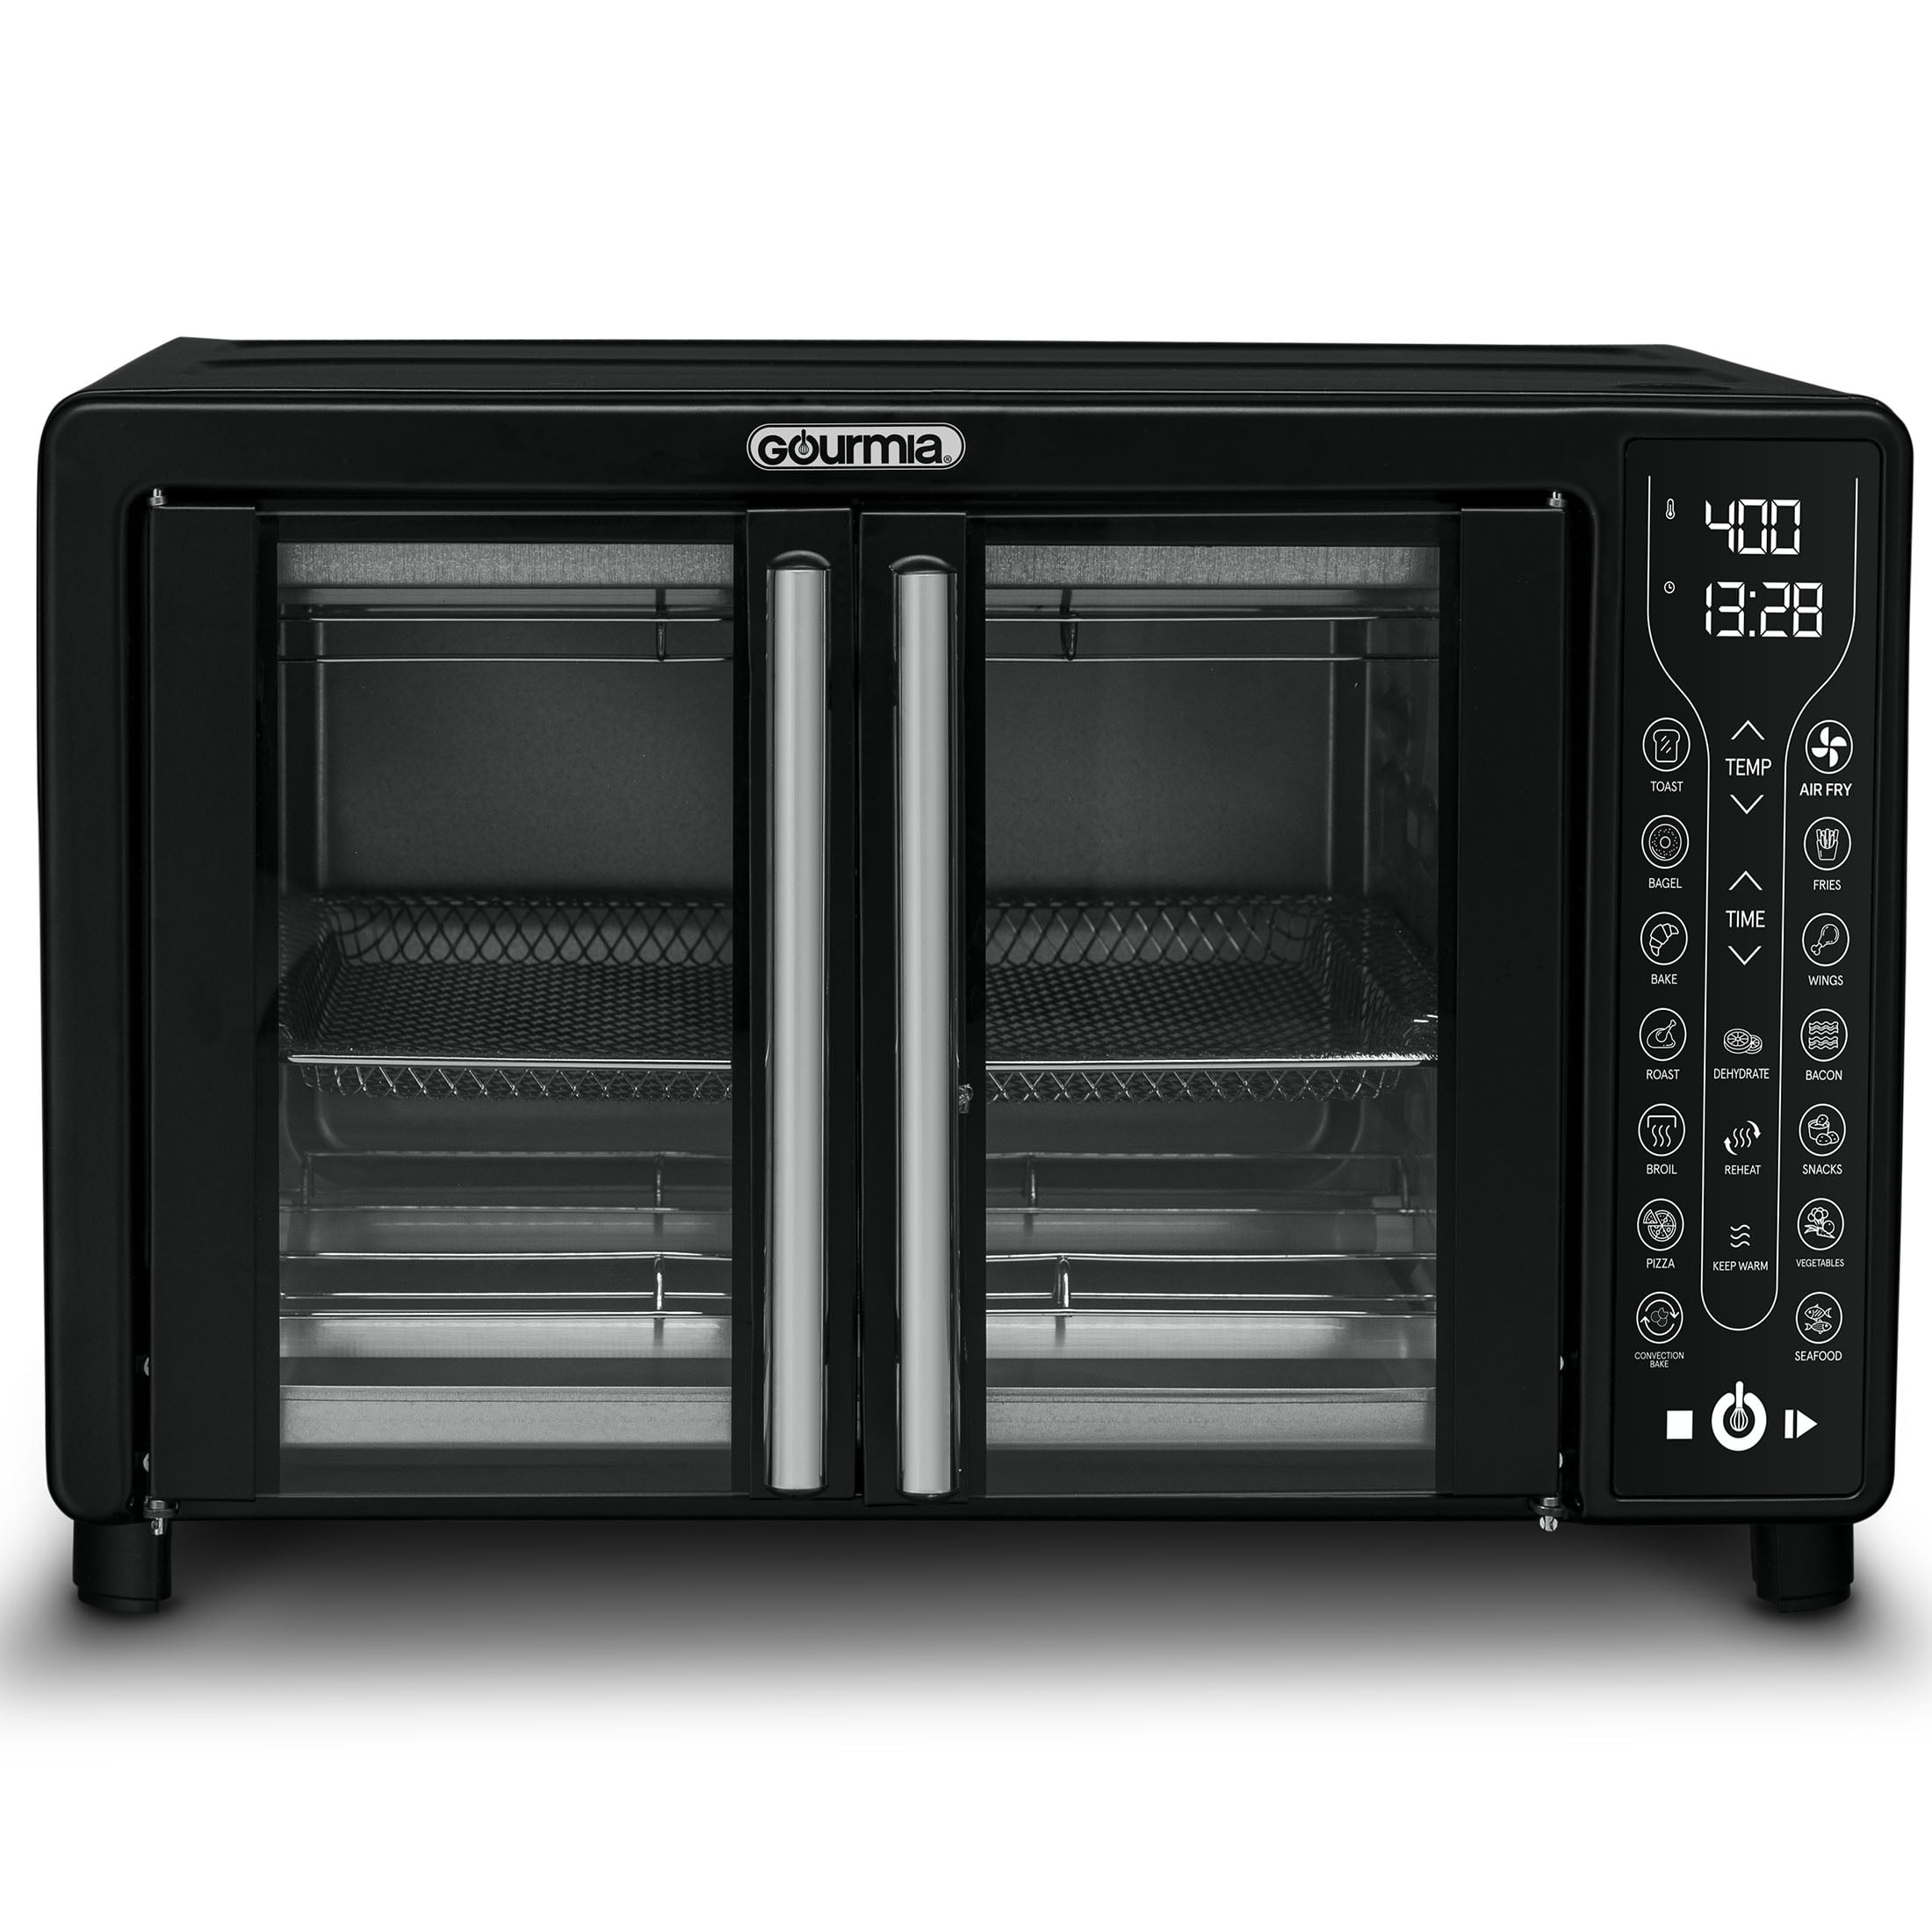 Removable Double Glazed Door Including Baking Grill and Tray Timer Function COSTWAY Built-in Stainless Steel 71L Electric Multifunction Oven with 4 Cooking Modes